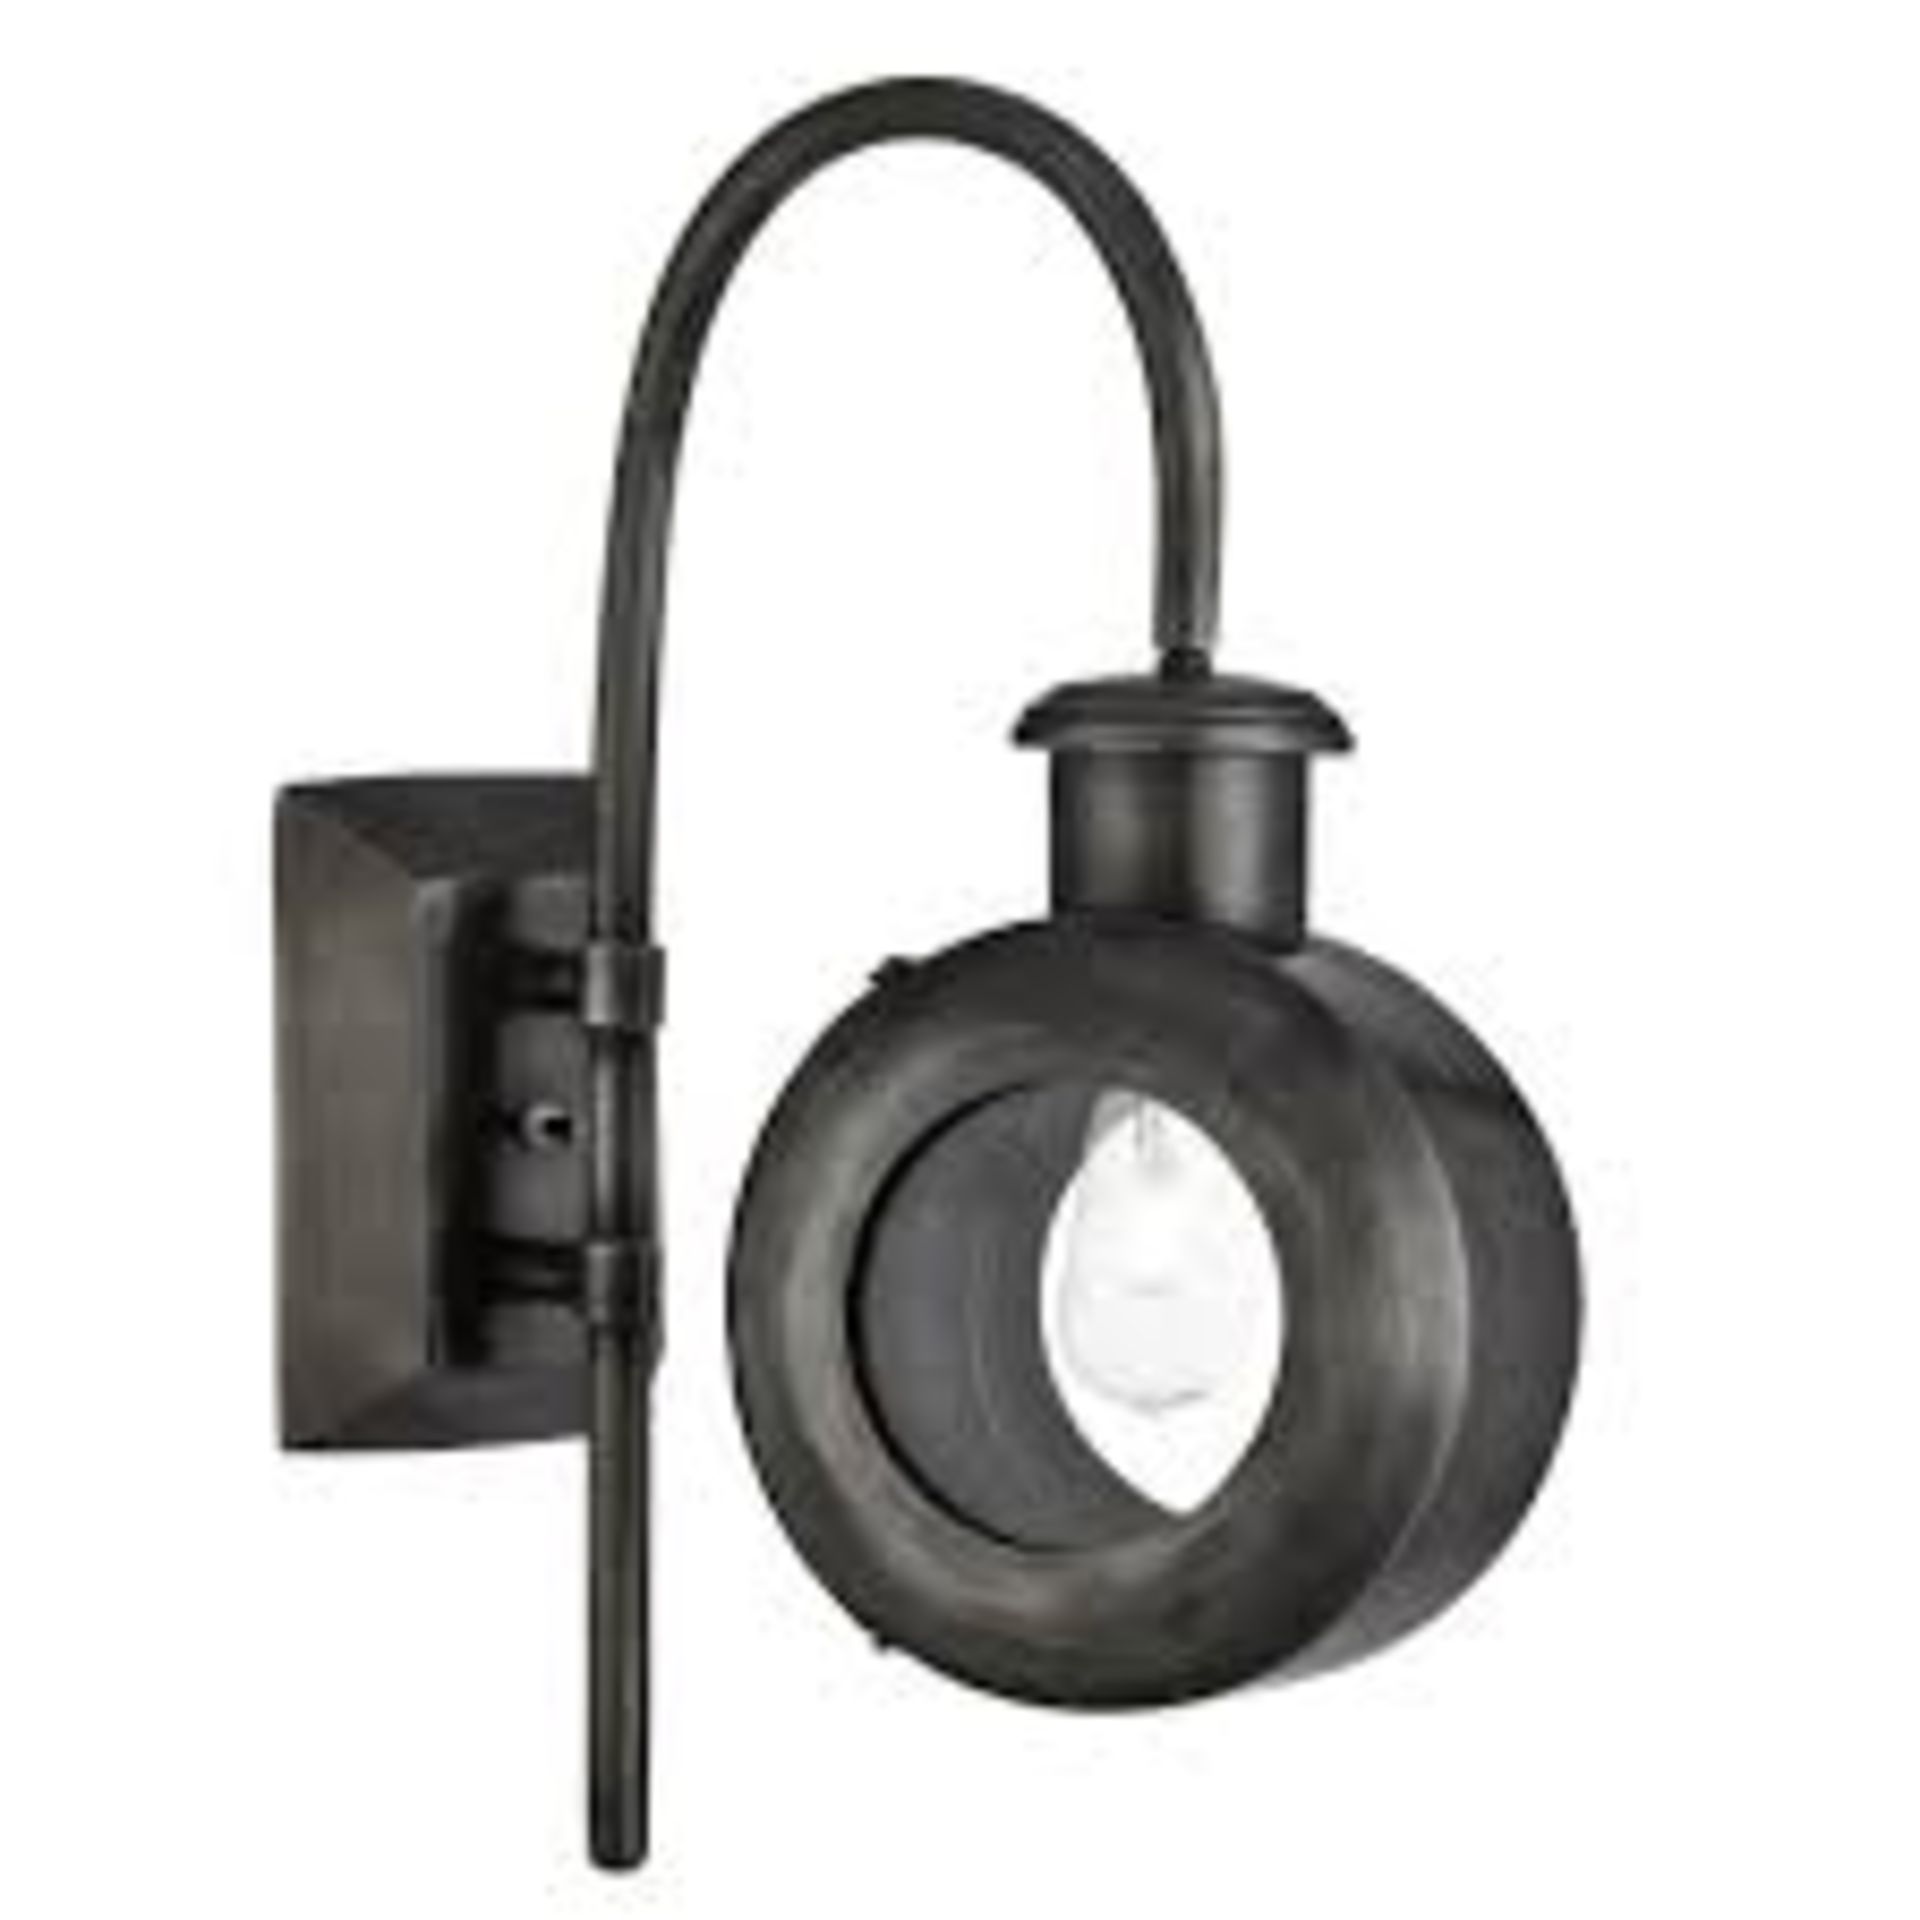 1 x Searchlight Small Port-Hole Wall bracket - Ref: 4991SI - New and Boxed - RRP: £75 - Image 4 of 4